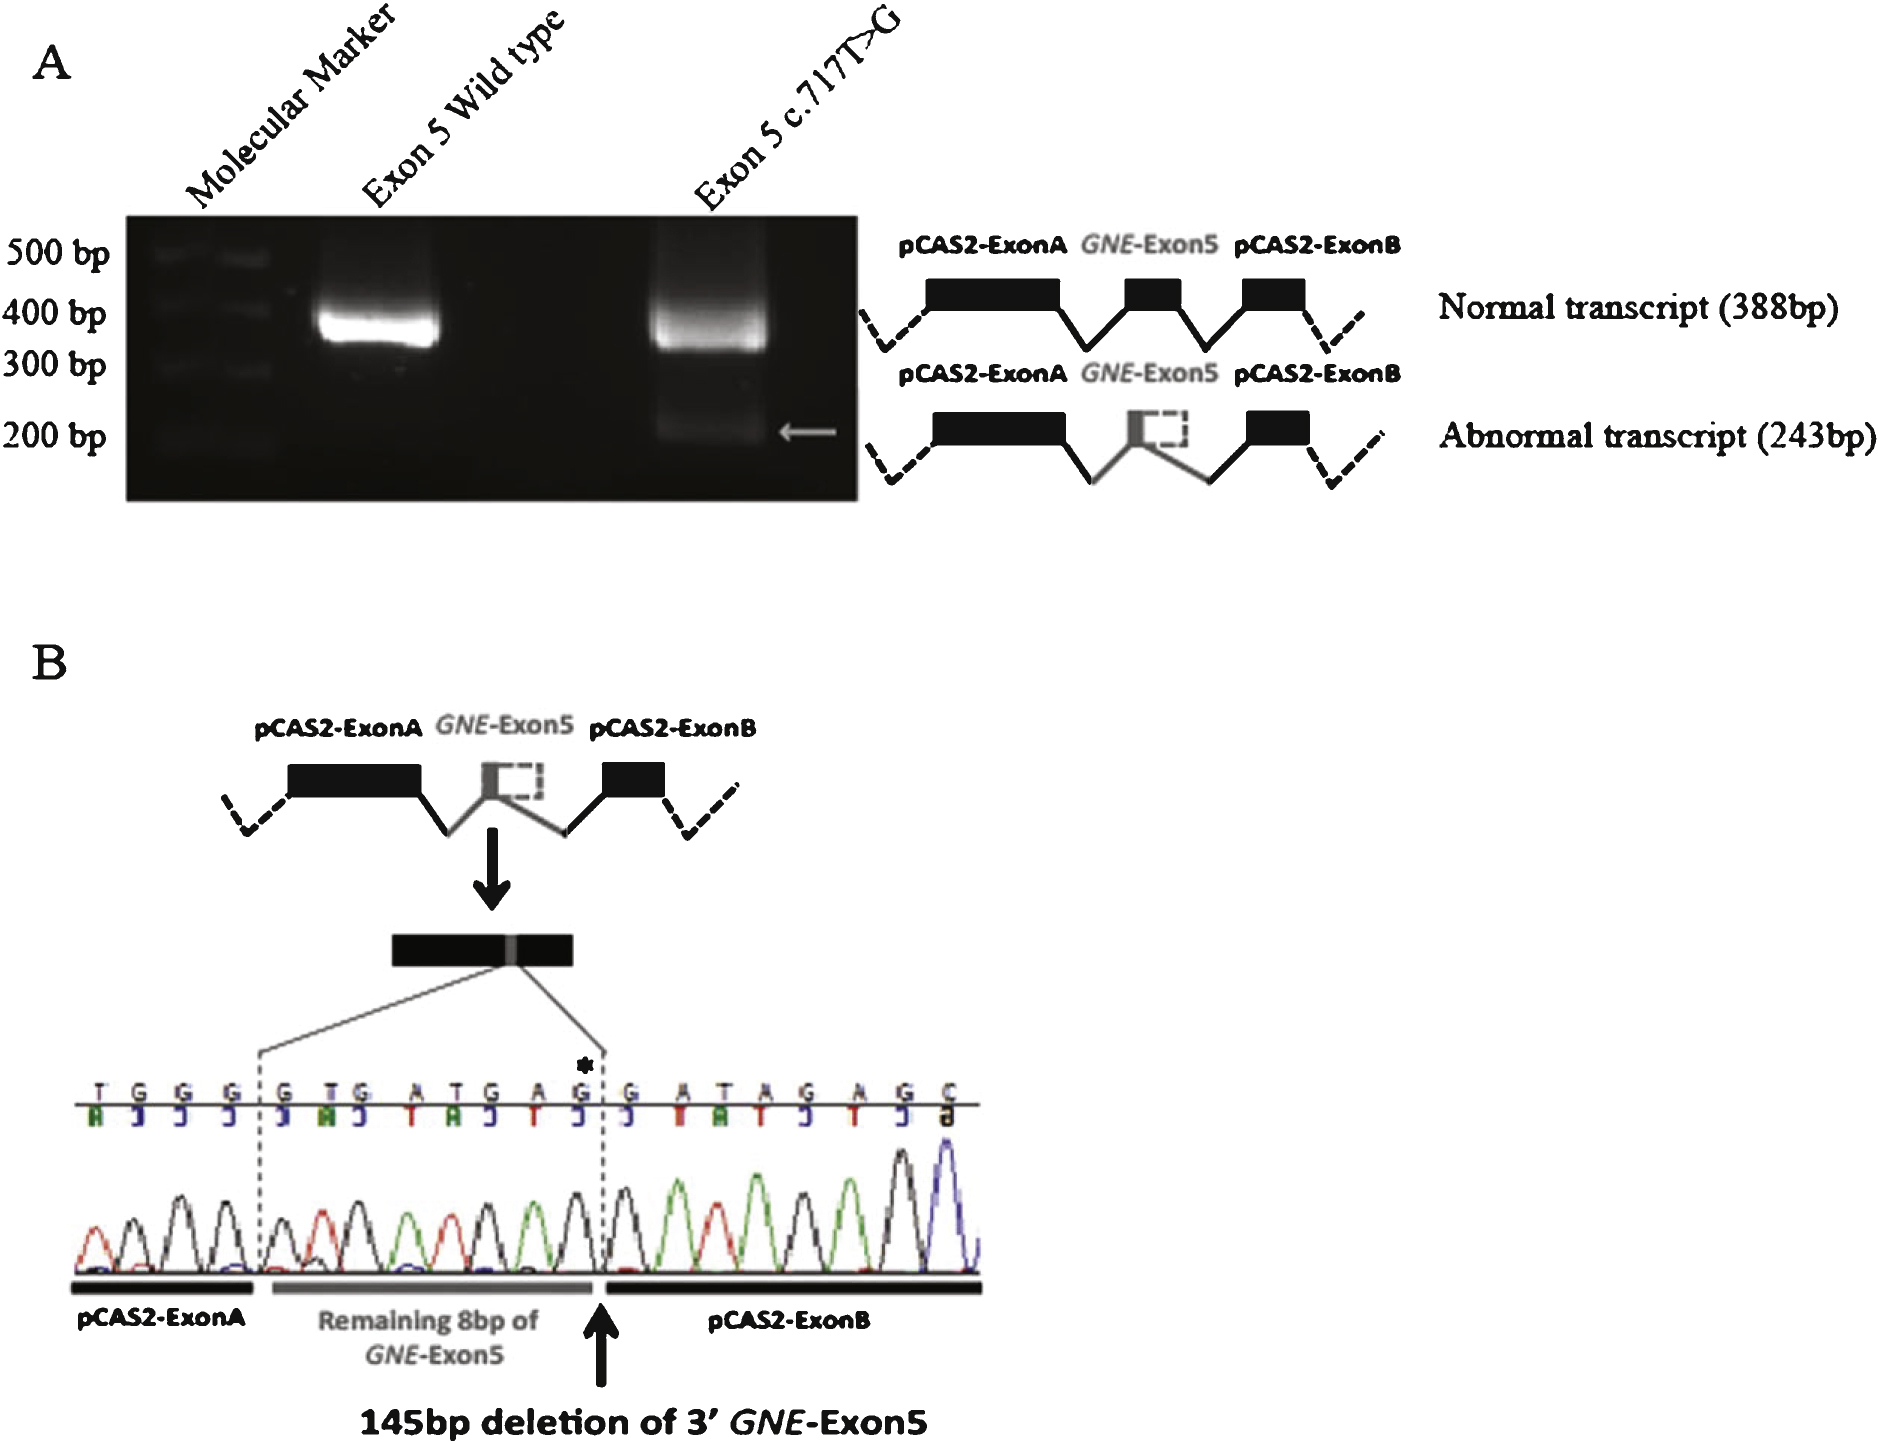 Transcriptional analysis of the GNE variant c.717T>G using an in vitro minigene splicing assay. Transfection into HEK 293 cells was performed both using a wild type (Exon 5 WT) construction and the mutant pCAS2 construction (Exon 5 c.717T>G). Forty-eight hours after transfection, transcriptional analysis was performed and the effect on splicing identified using RT-PCR was further confirmed using Sanger sequencing. A. RT-PCR analysis identifies the presence of an abnormally spliced transcript (arrow) in HEK 293 cells transfected with the mutant pCAS2 construction (Exon 5 c.717T>G), as compared to cells transfected with the wild type (Exon 5 WT) construction. B. Sequence analysis of the different transcripts identifies for the abnormally spliced transcript a 145 bp deletion of the 3’ extremity of exon 5, correlating with the activation of a cryptic splice-donor site caused by the c.717T>G variant (indicated by  *).